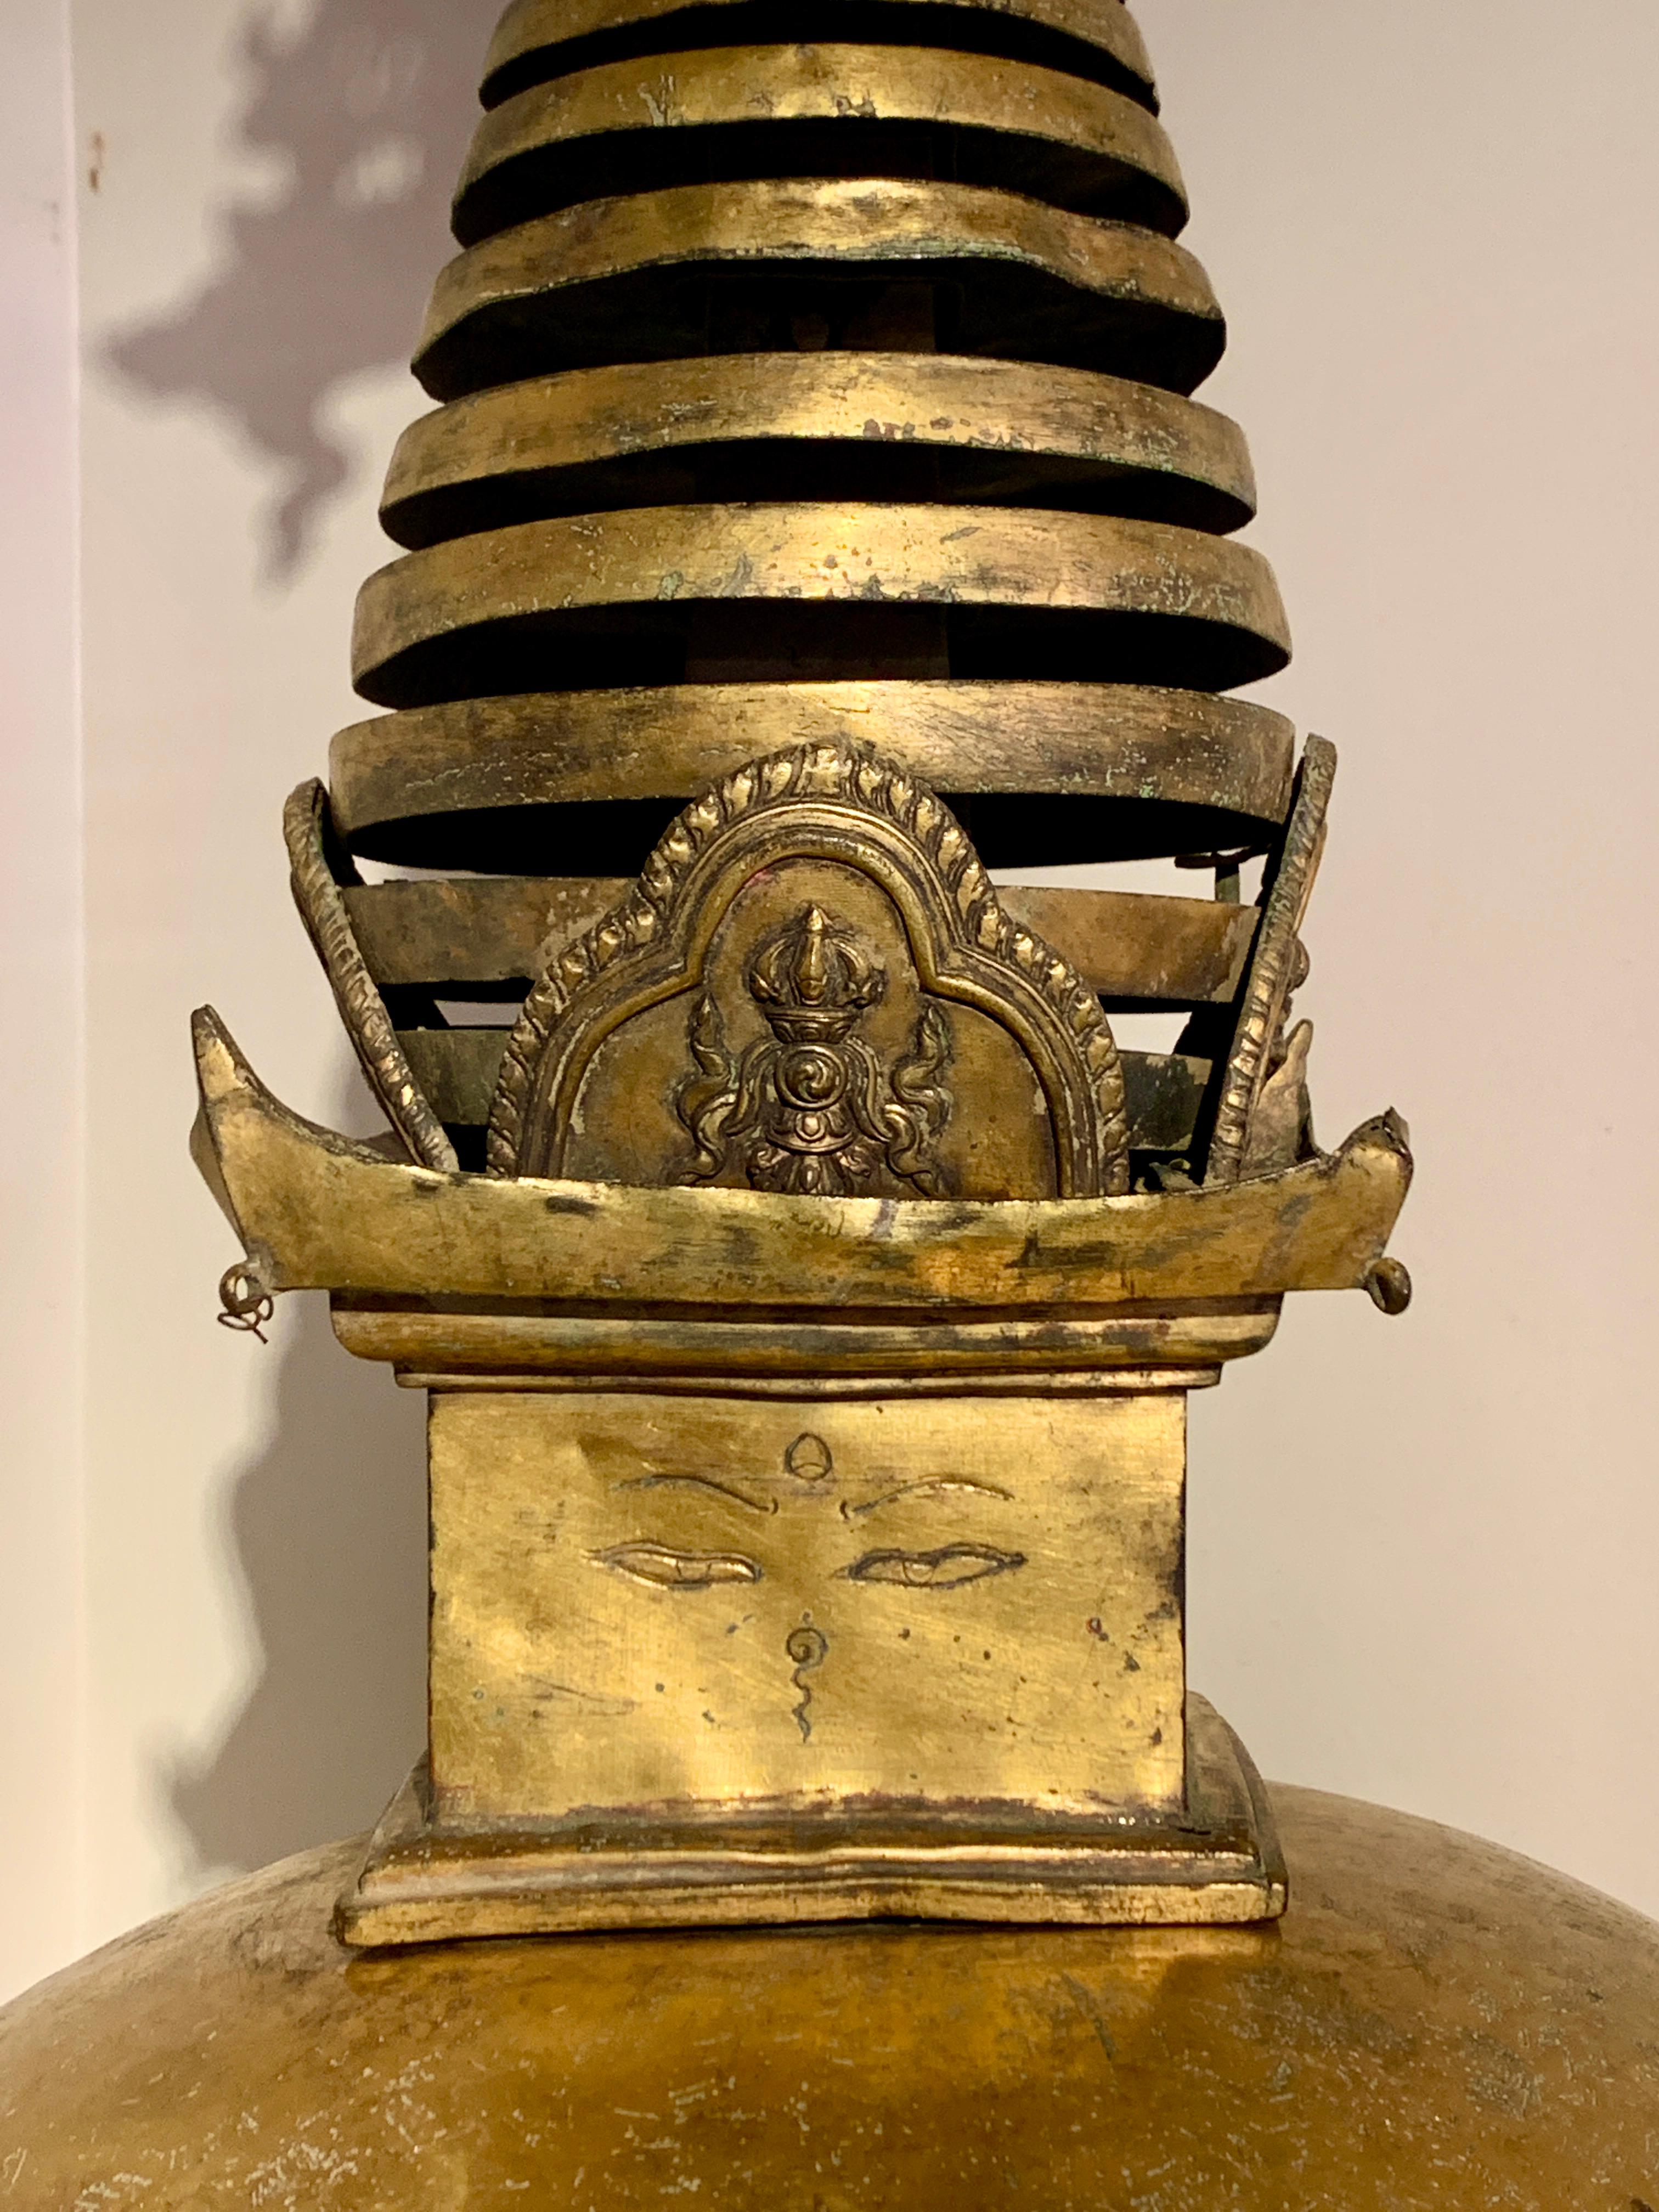 18th Century and Earlier Large Nepalese Gilt Bronze Stupa, 16th/17th Century, Nepal